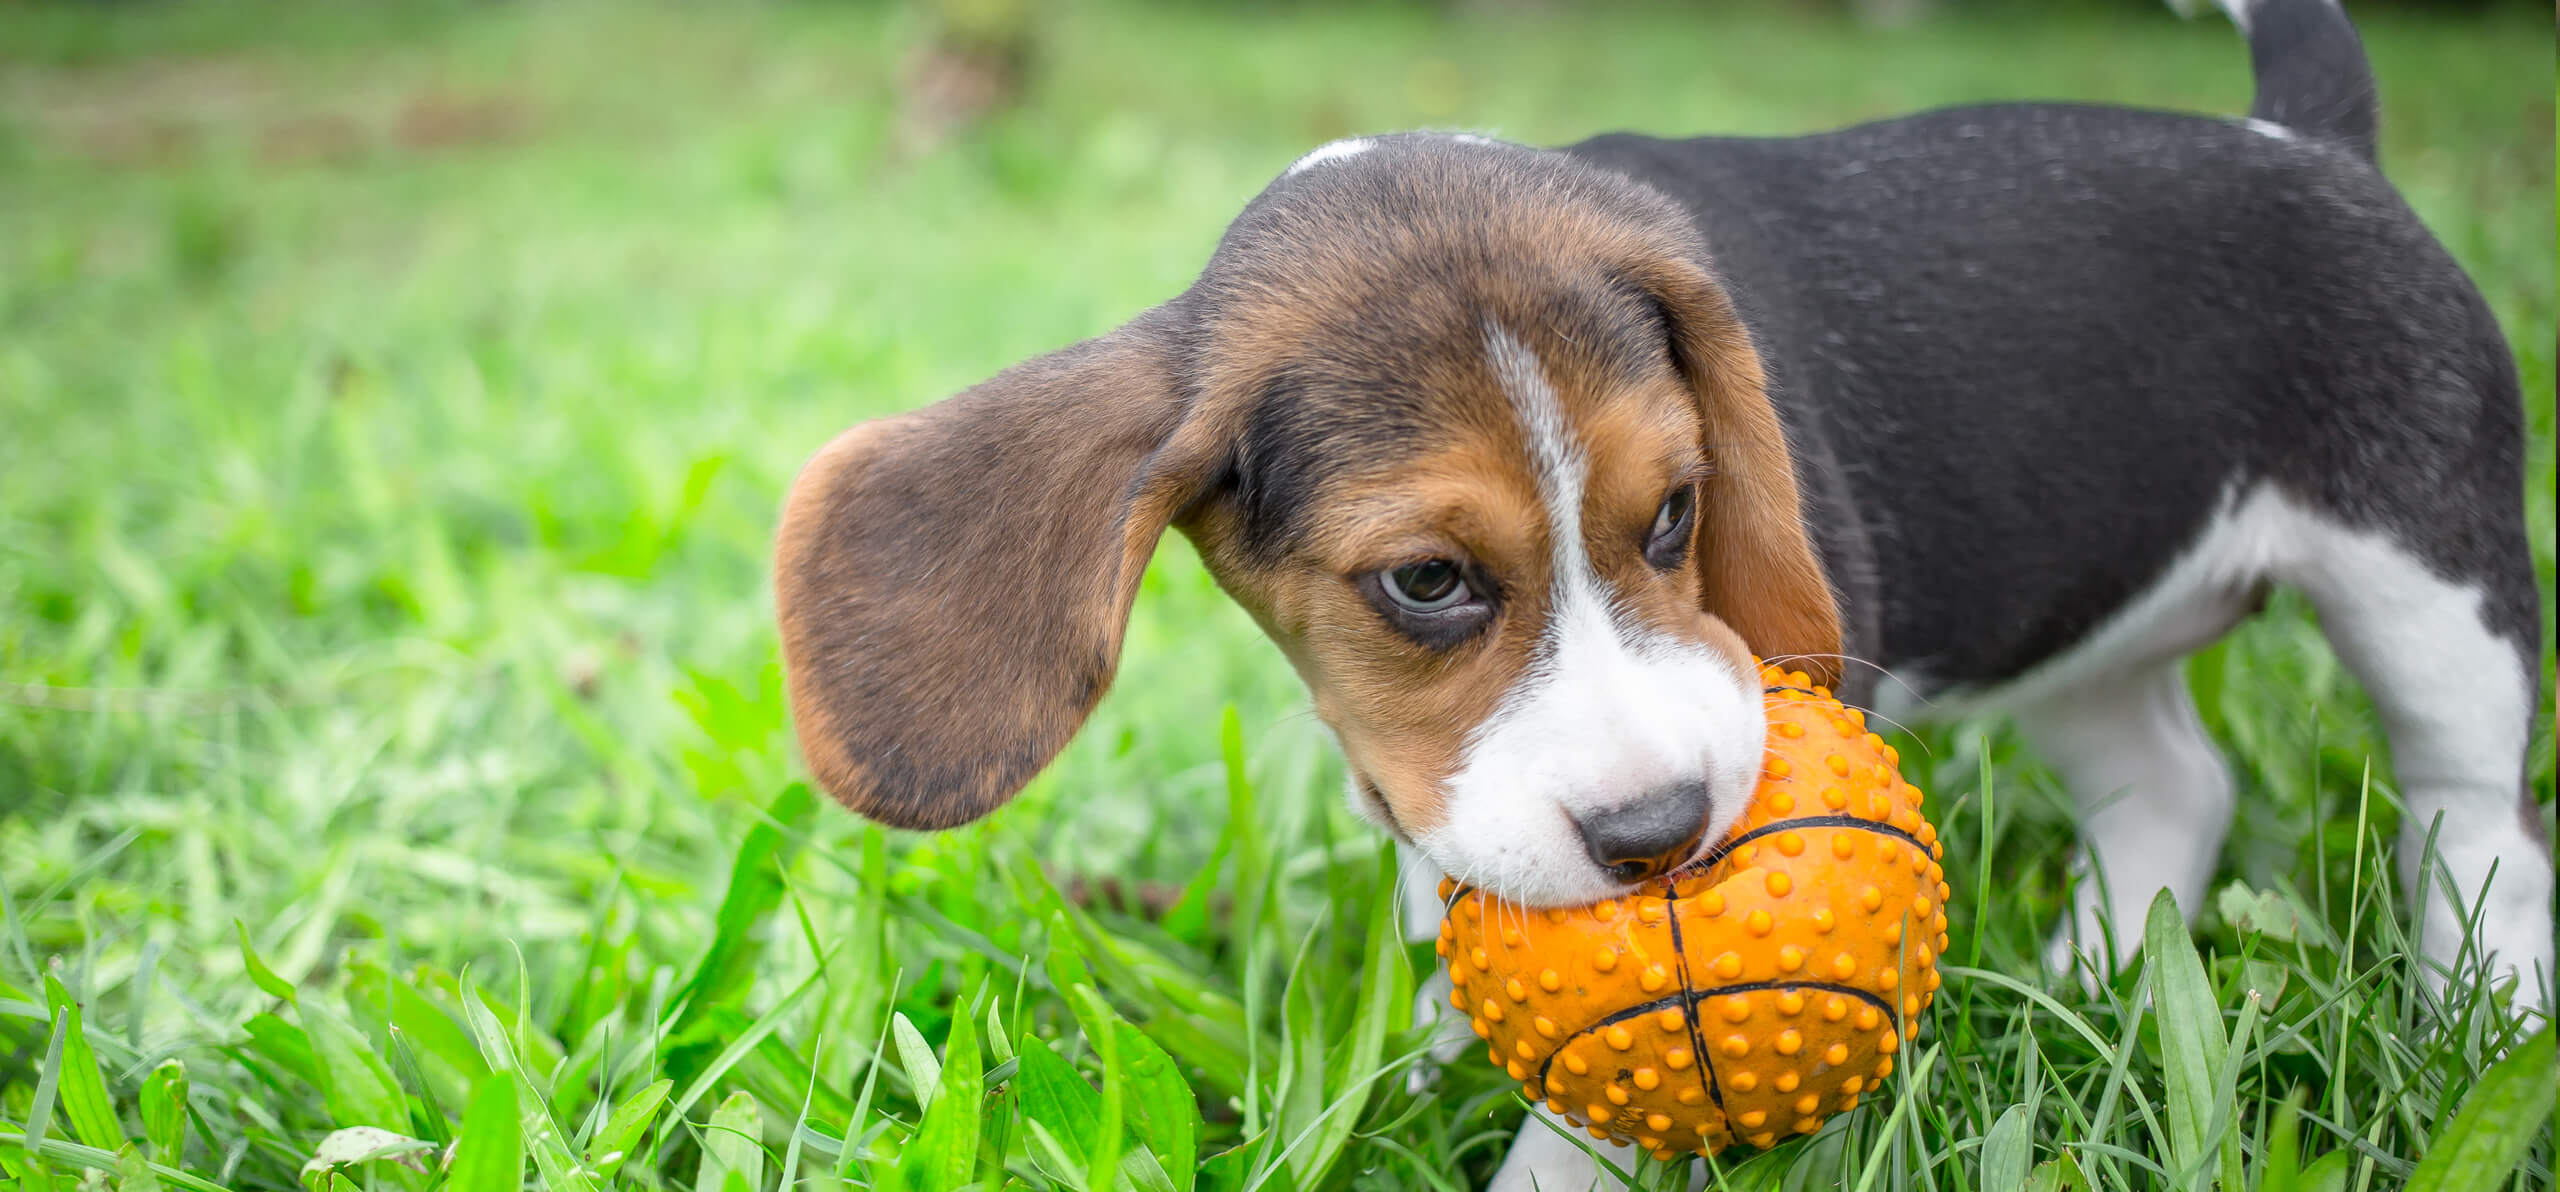 puppy holding a small basketball toy